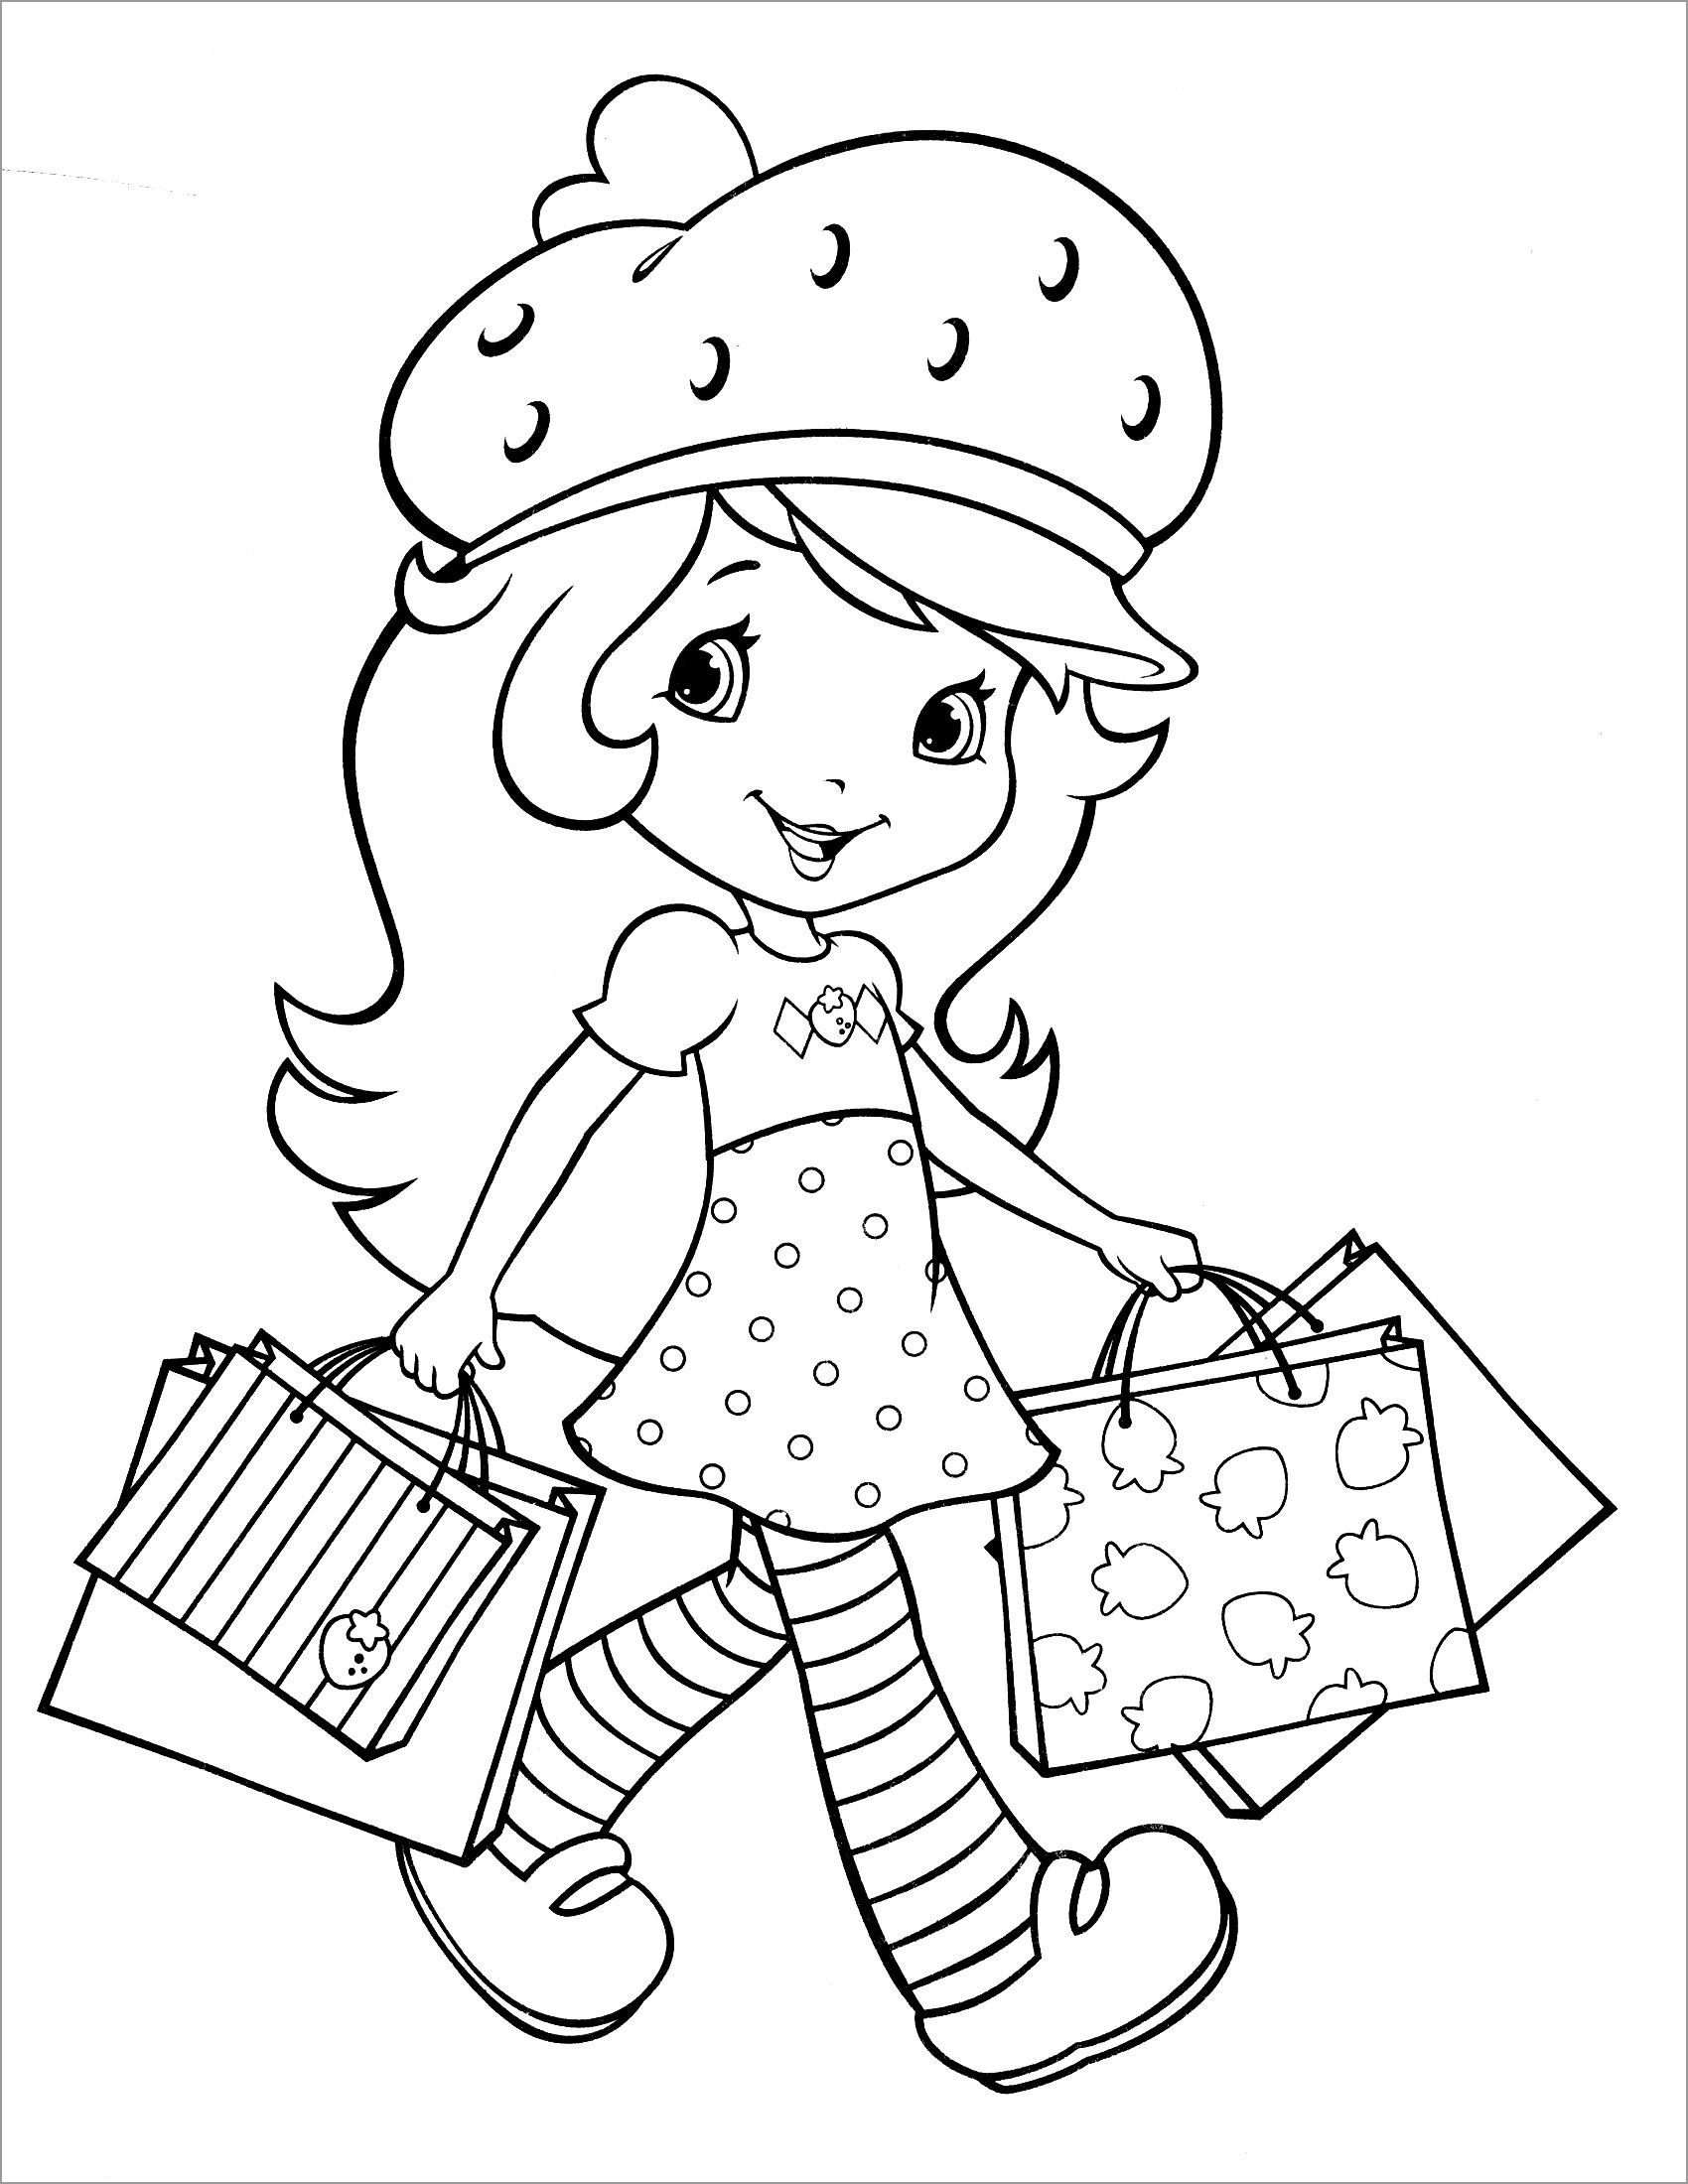 Strawberry Shortcake Shopping Coloring Page